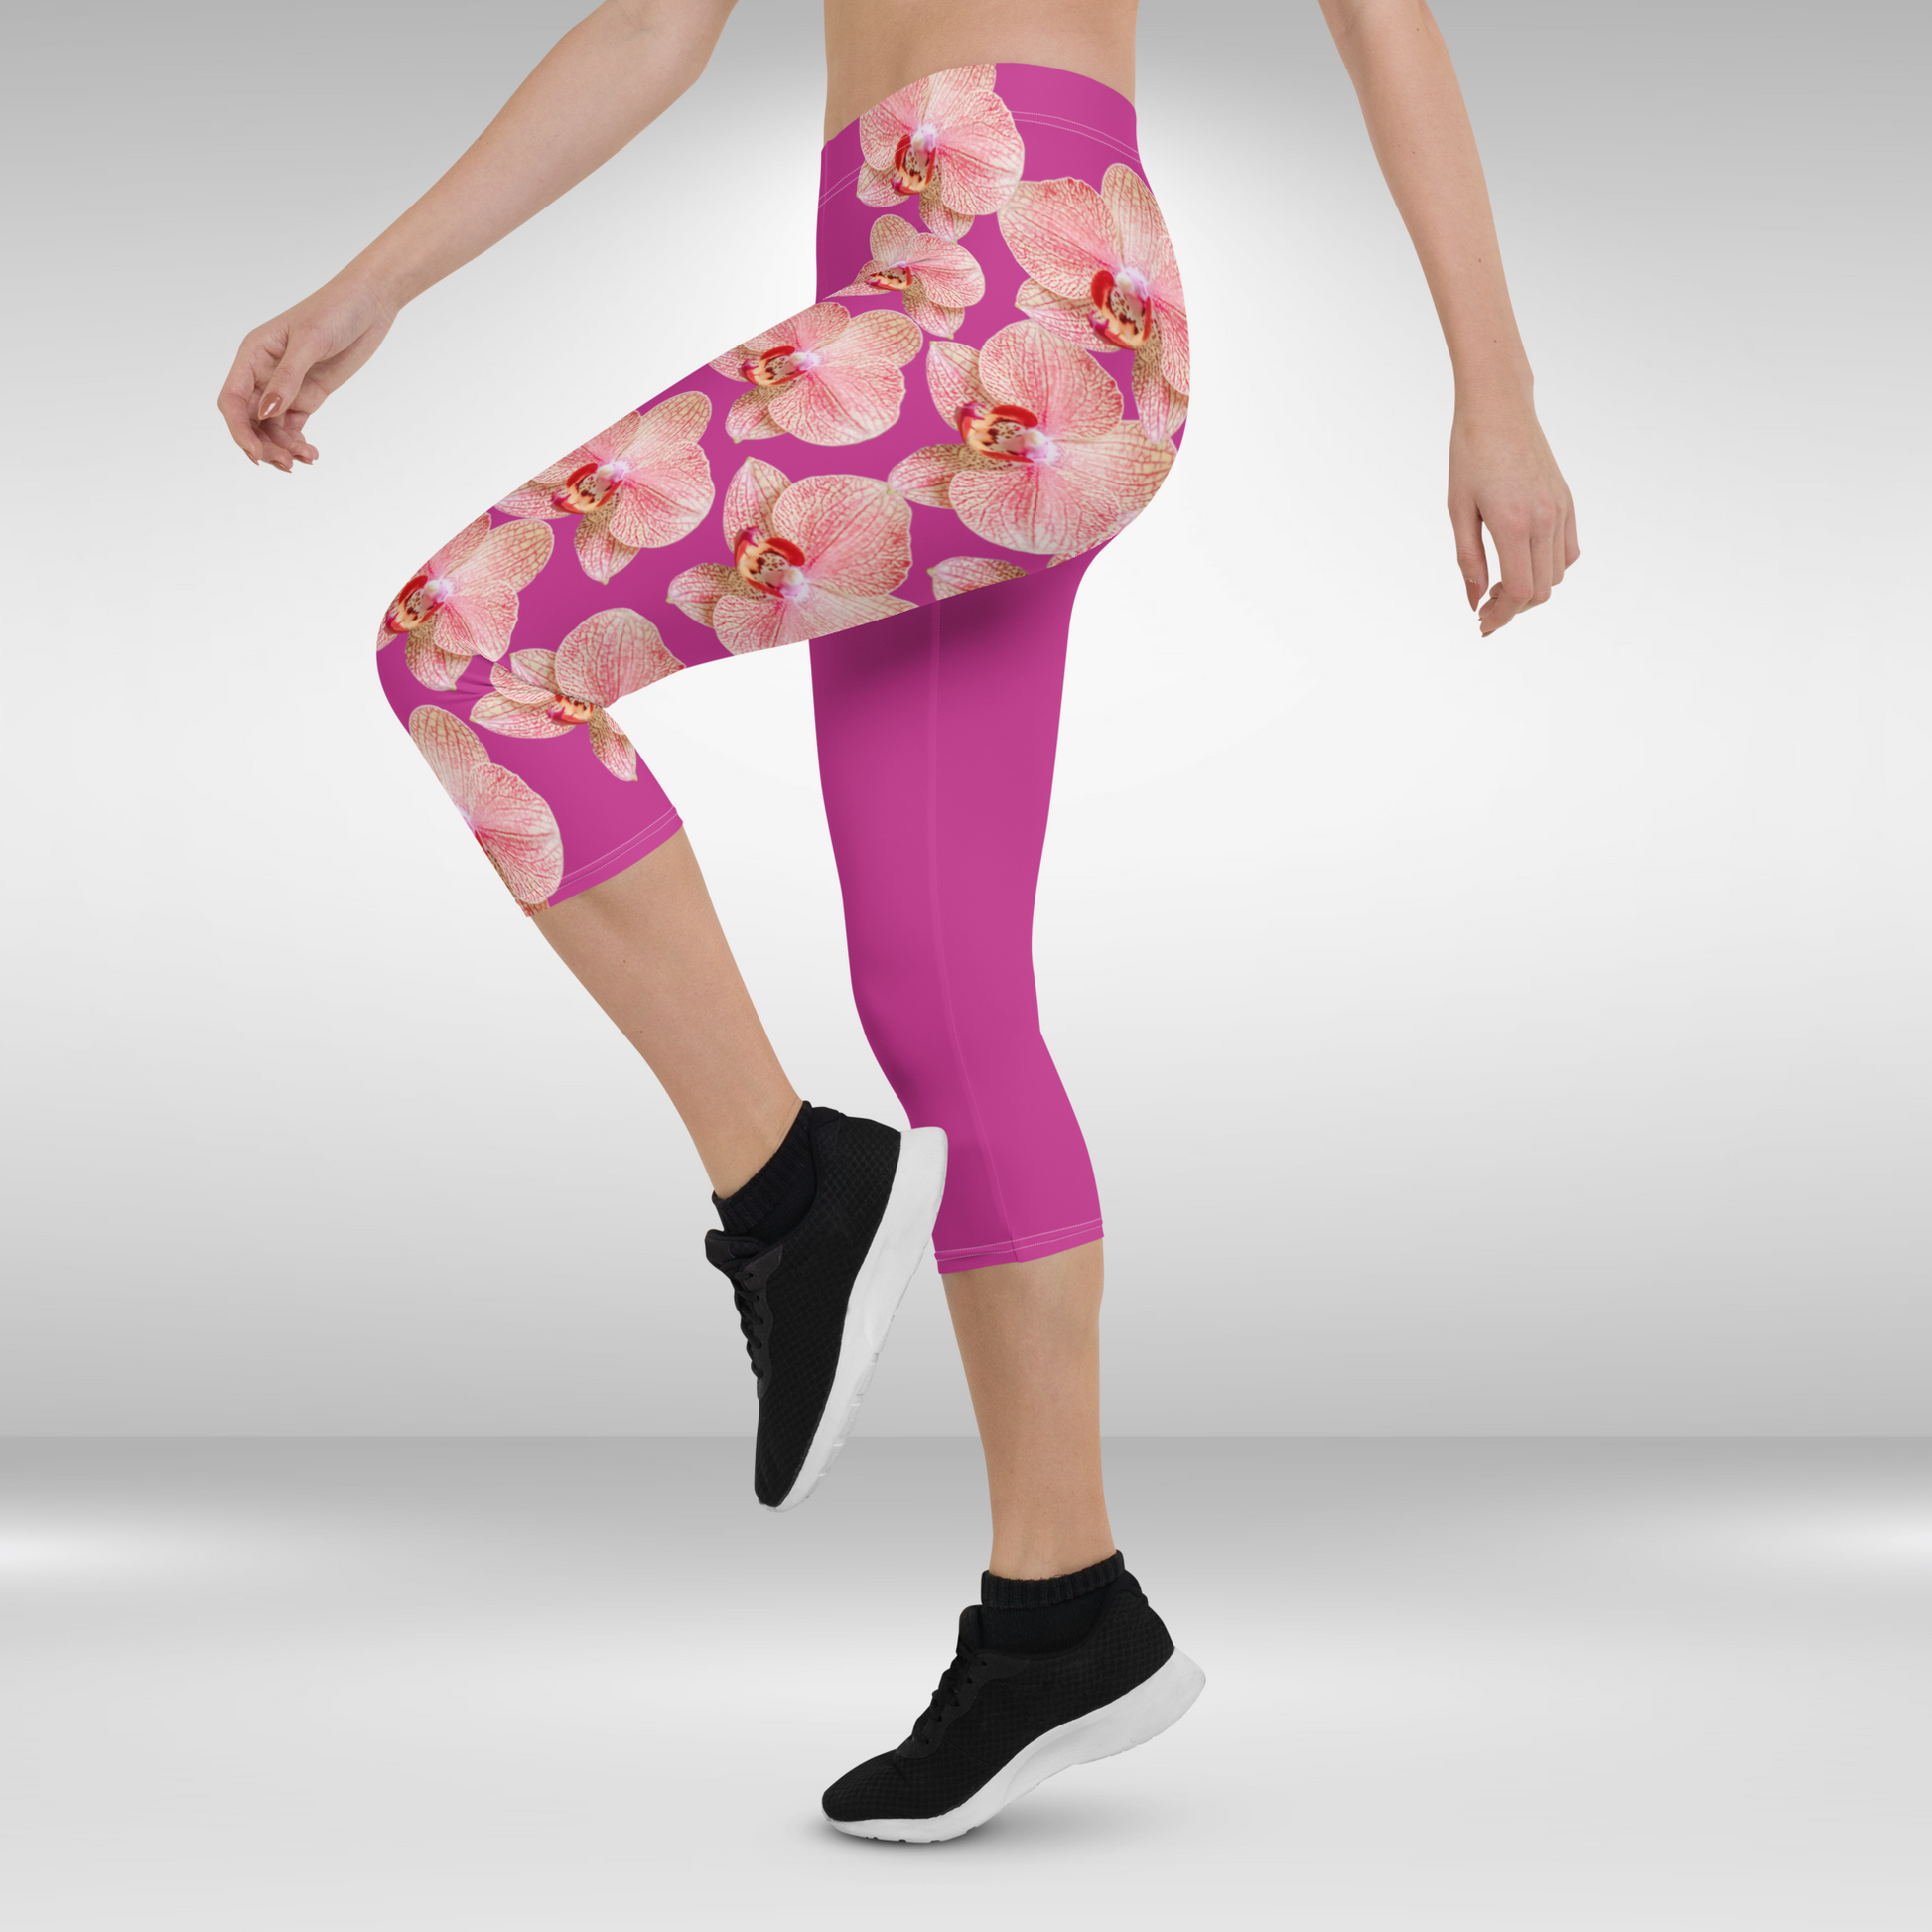 Women Capri Leggings - Red Violet Pink and White Orchid Print